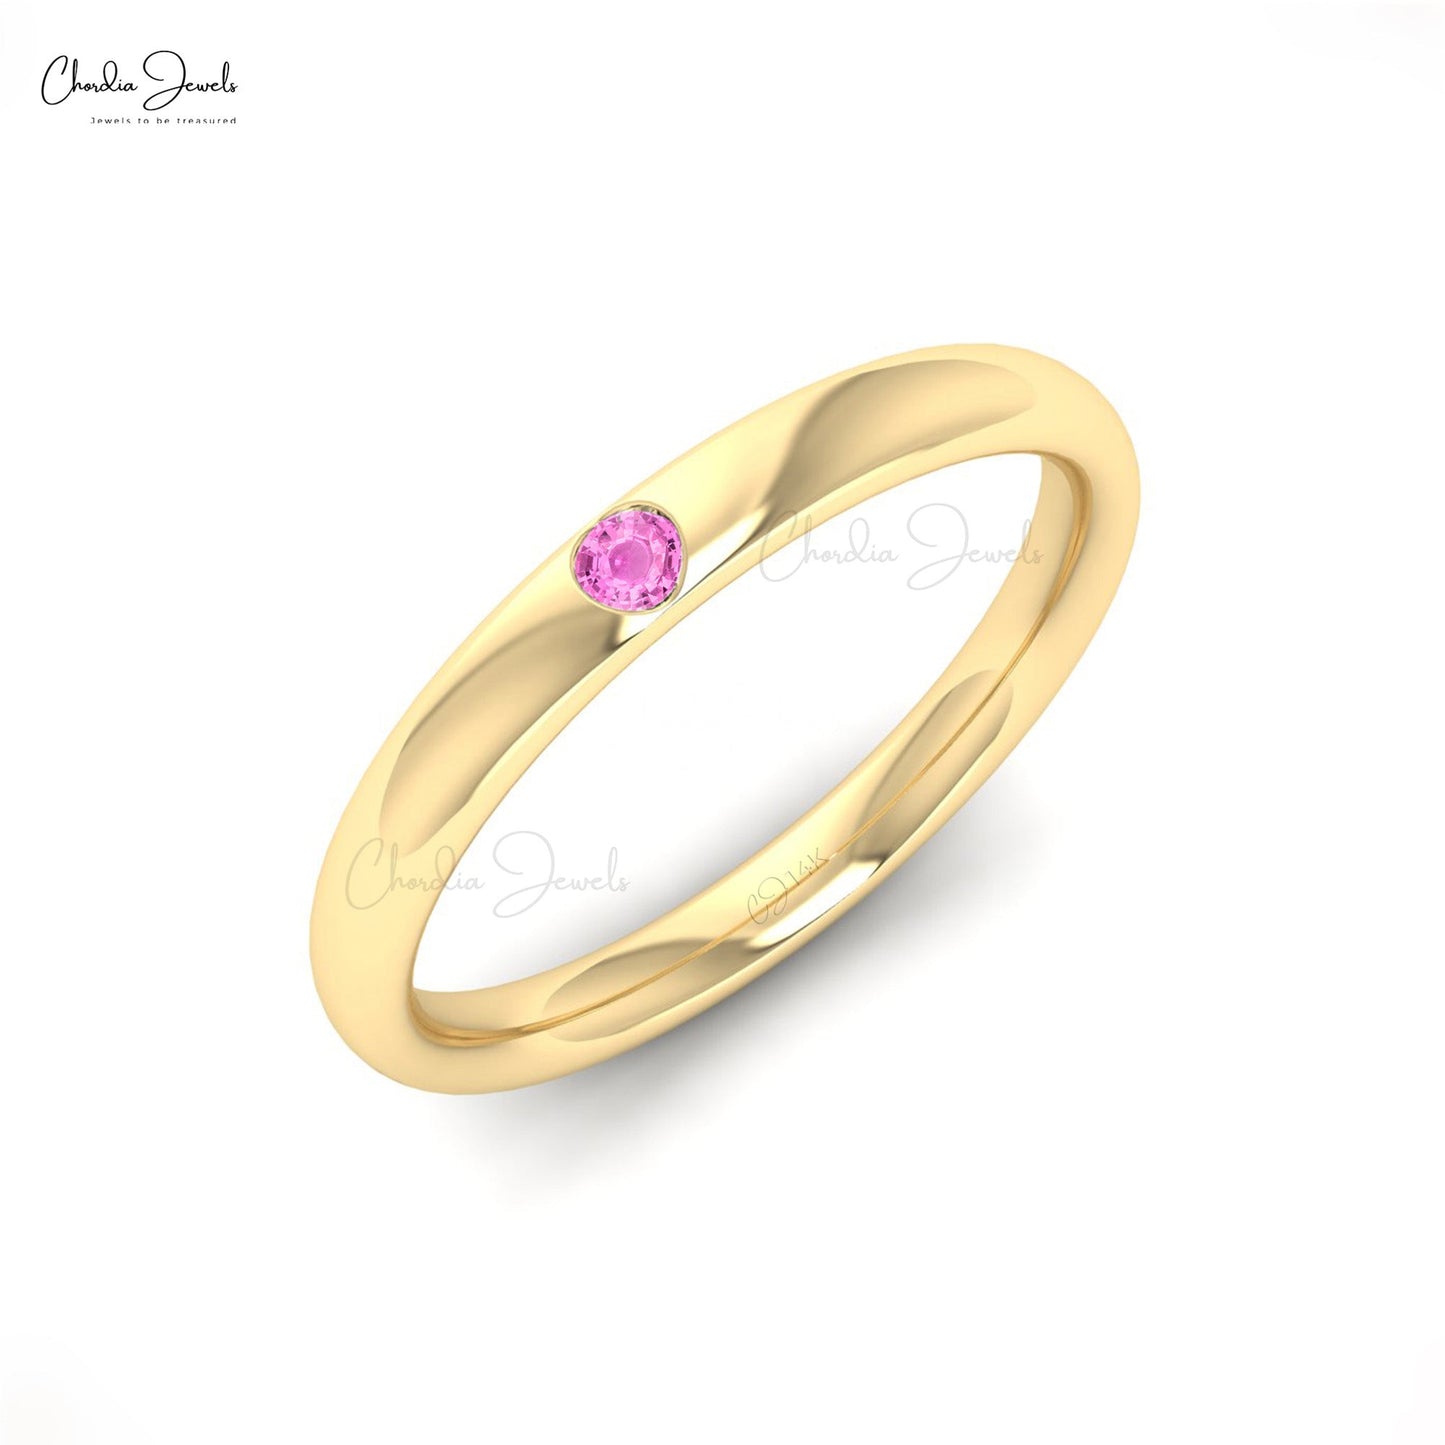 Round Cut Pink Sapphire Engagement Ring in 14k Solid Gold